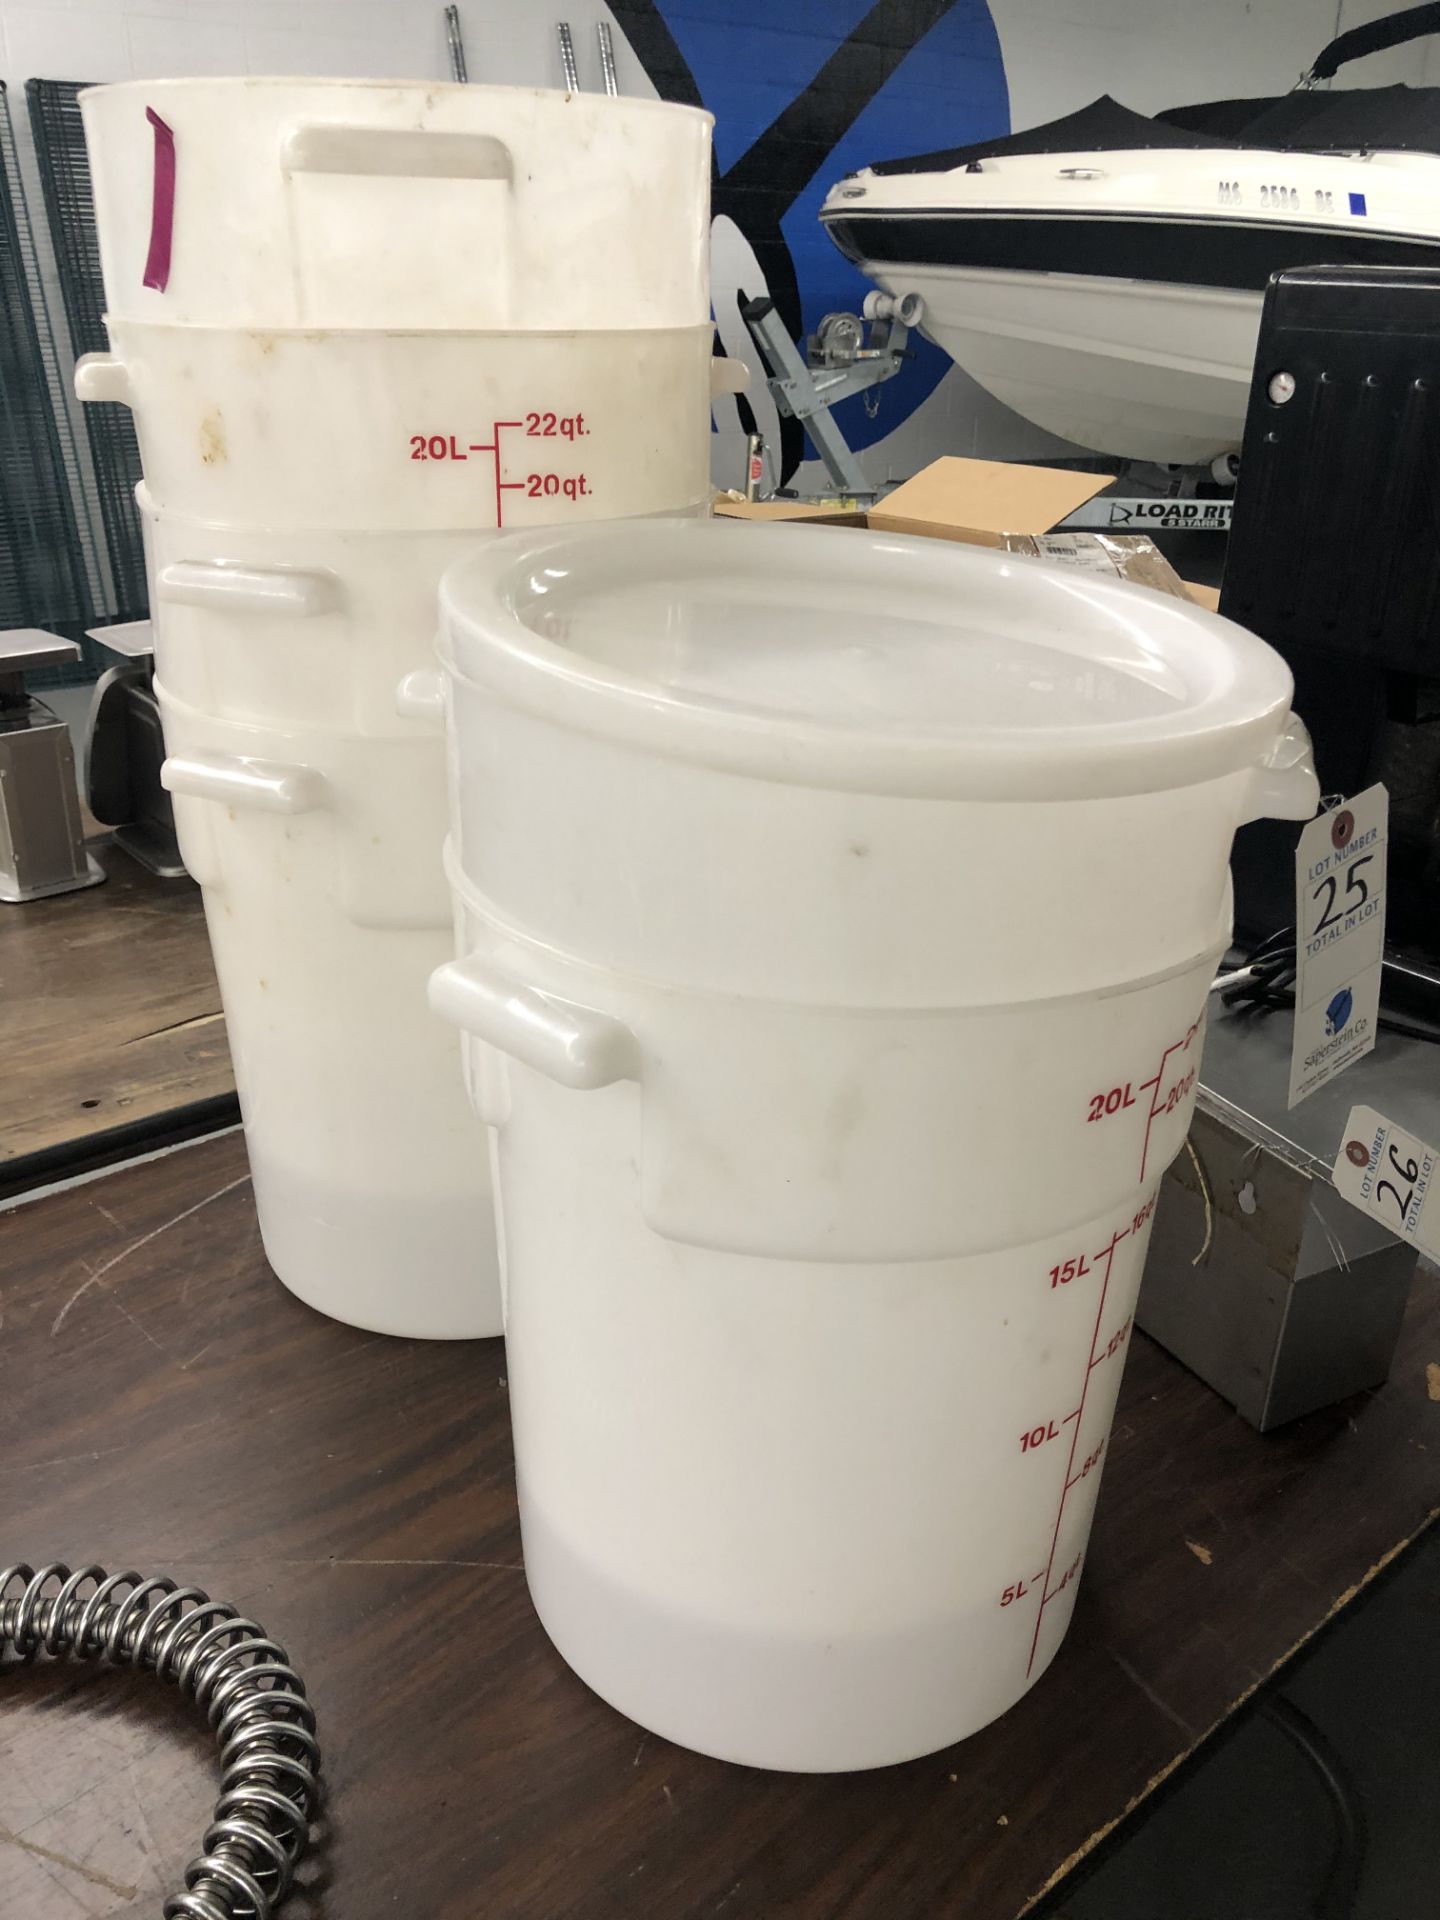 (6) 20 L Measuring Containers